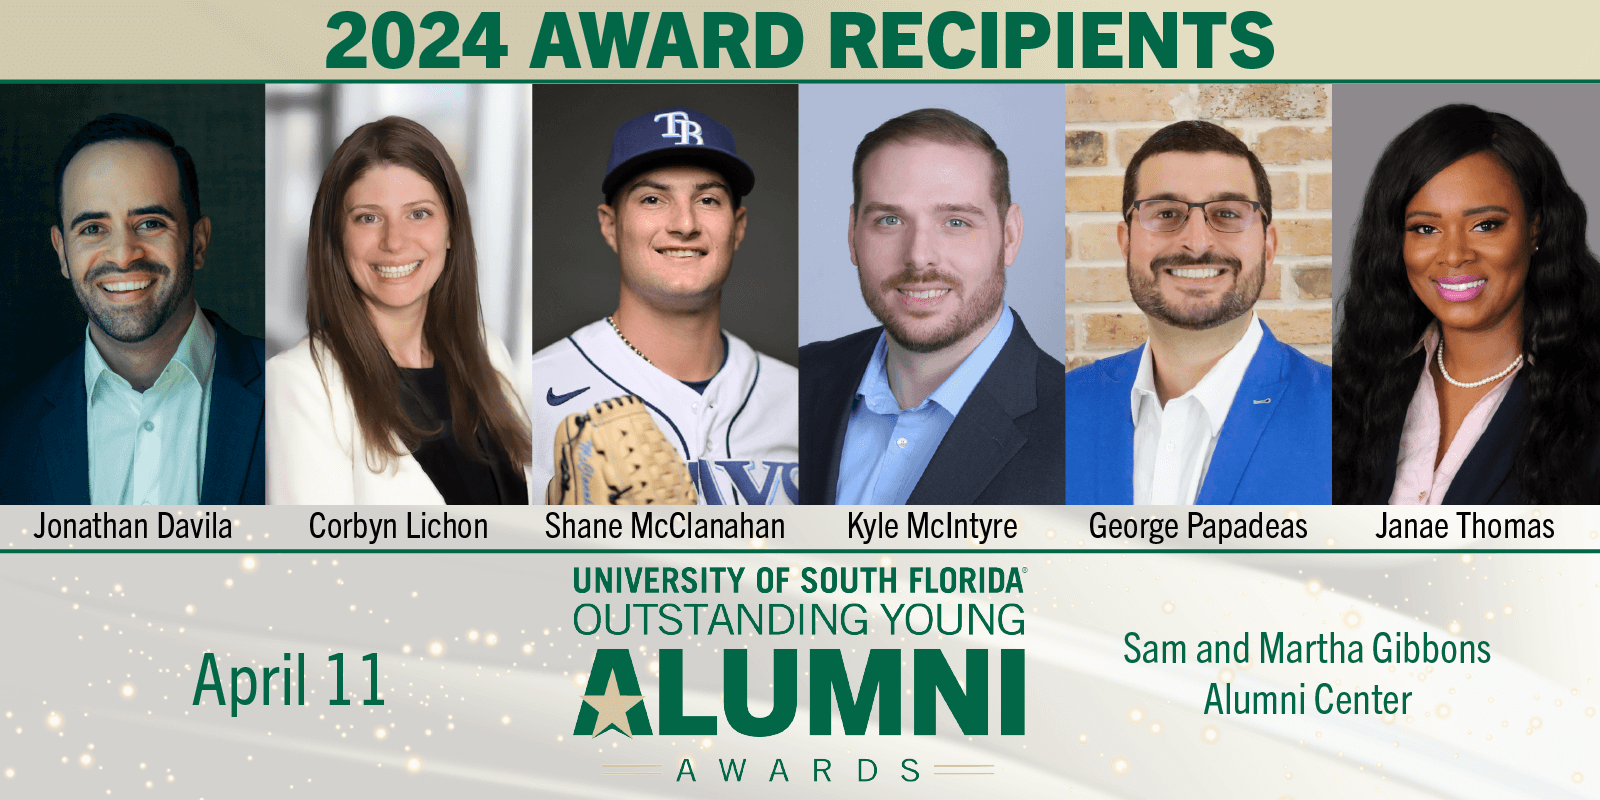 The six Outstanding Young Alumni Award recipients